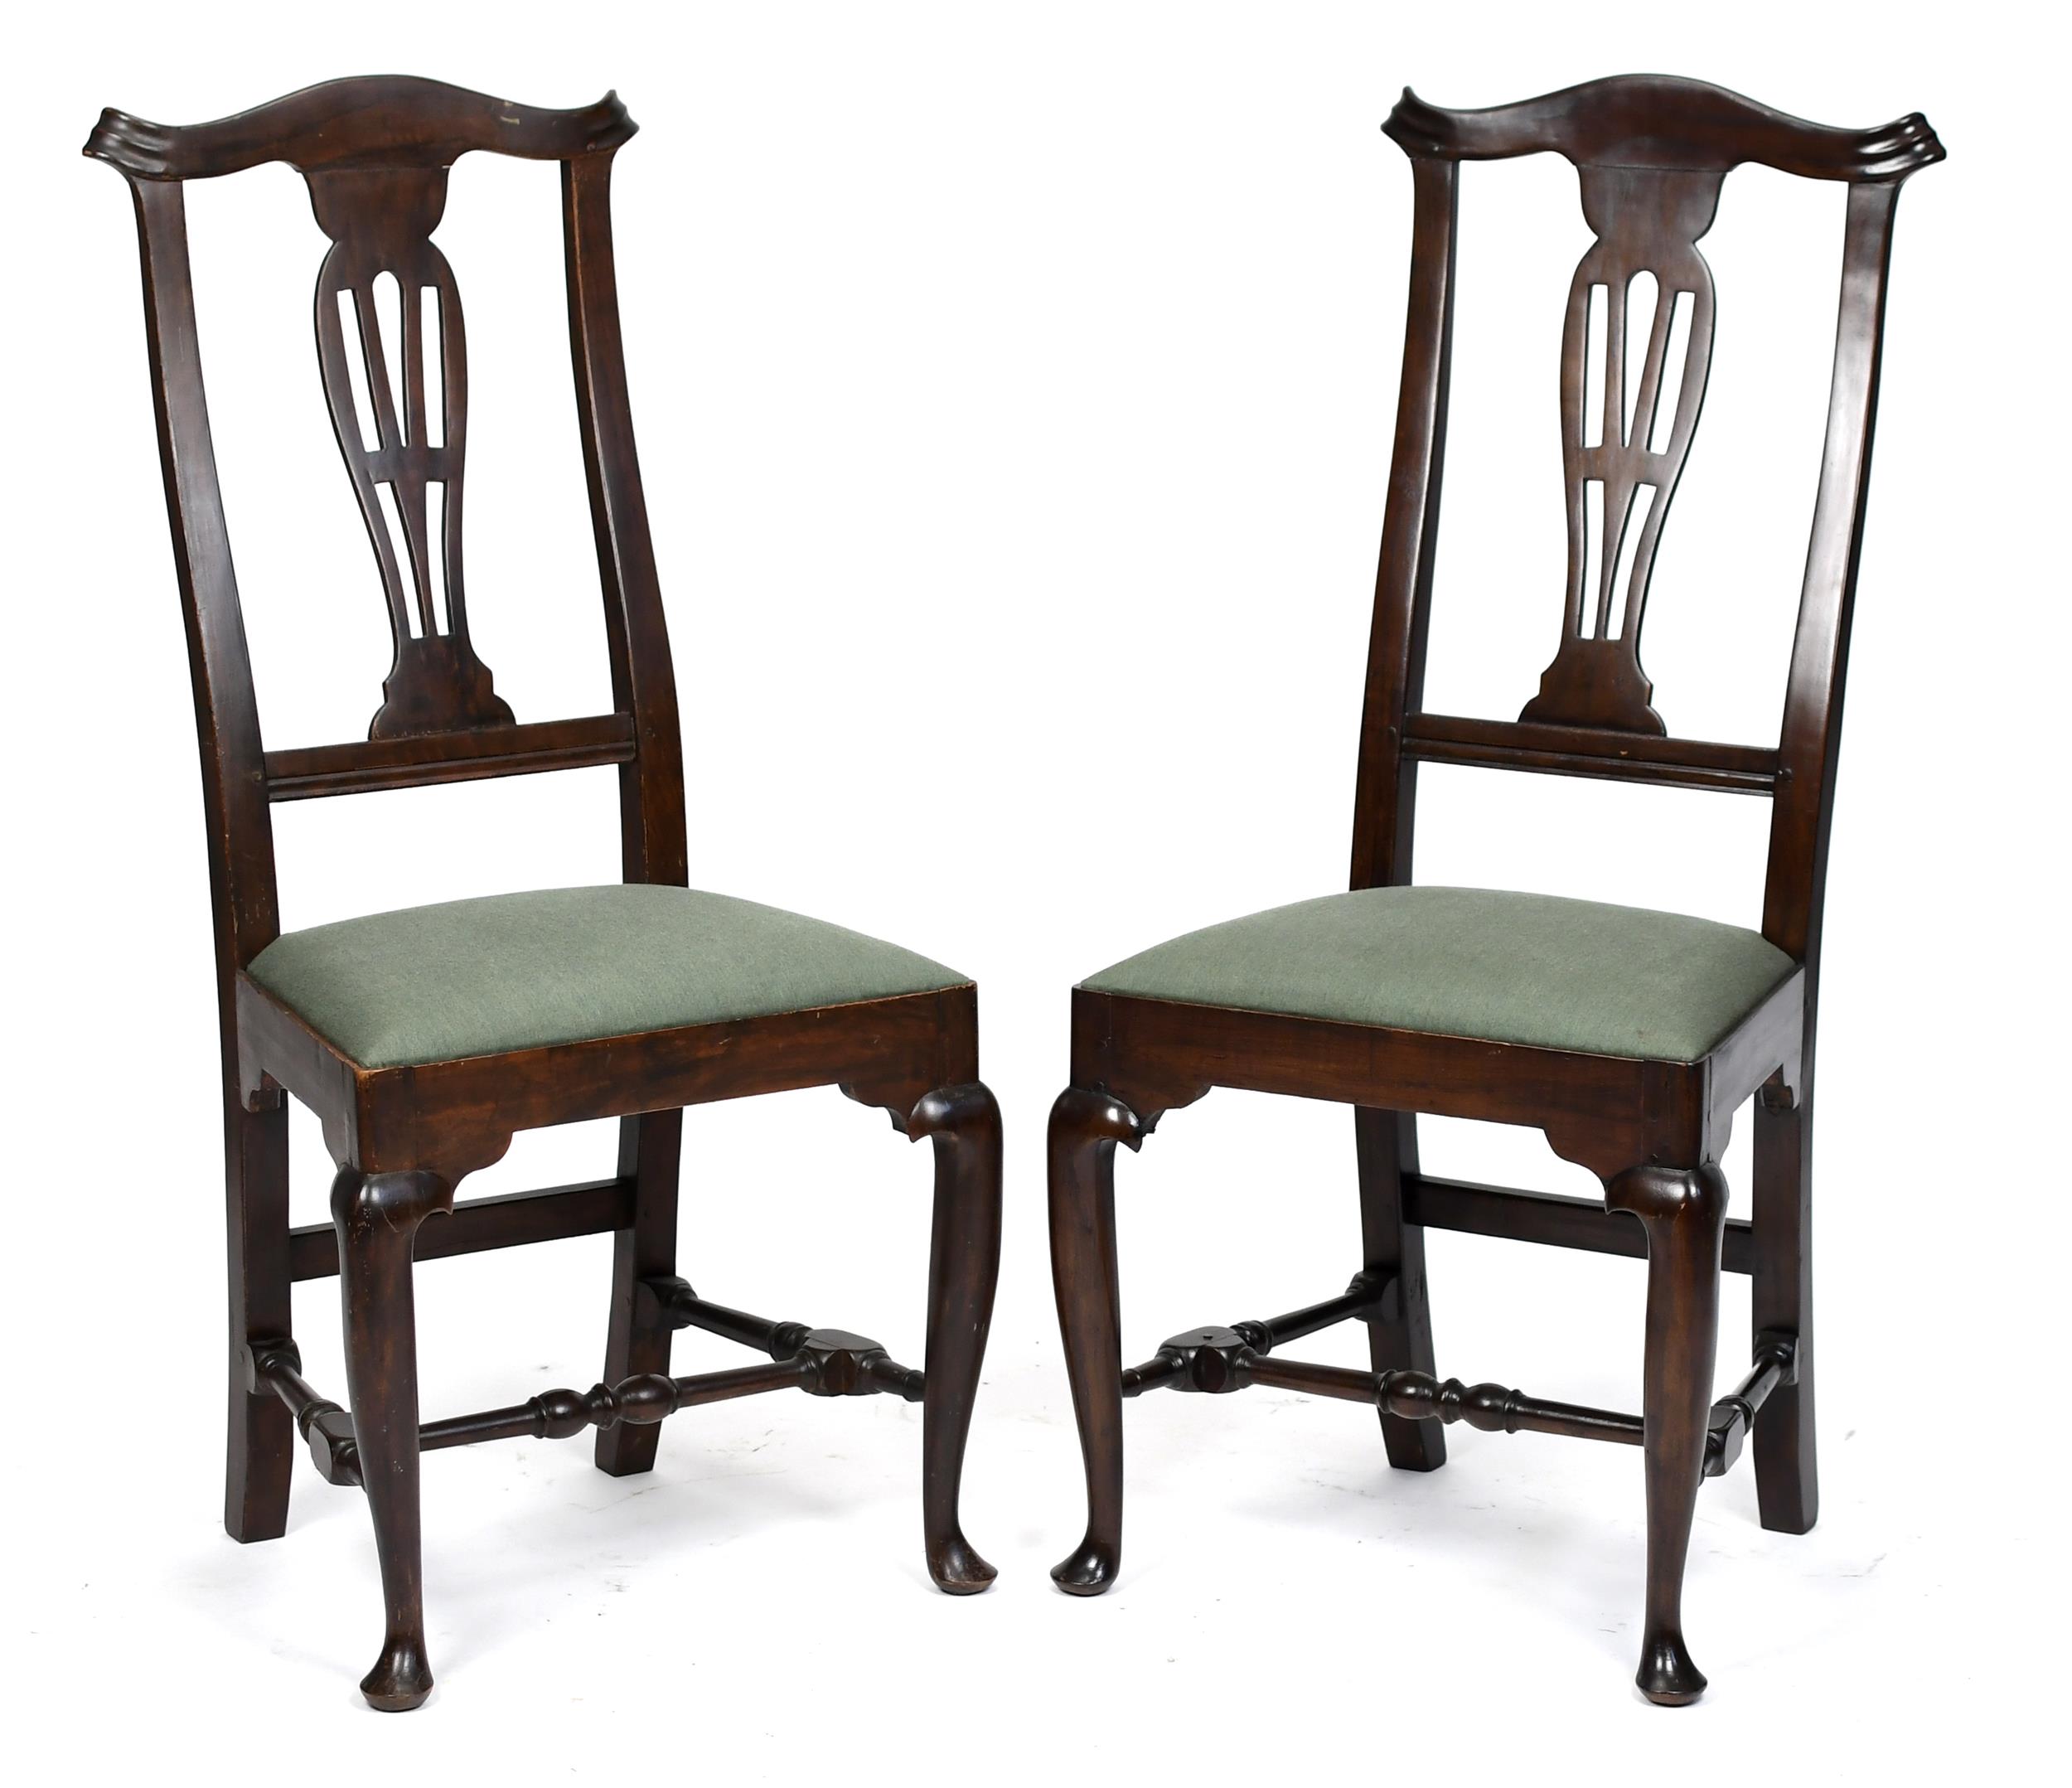 PAIR OF 18TH C QUEEN ANNE SIDE 307792